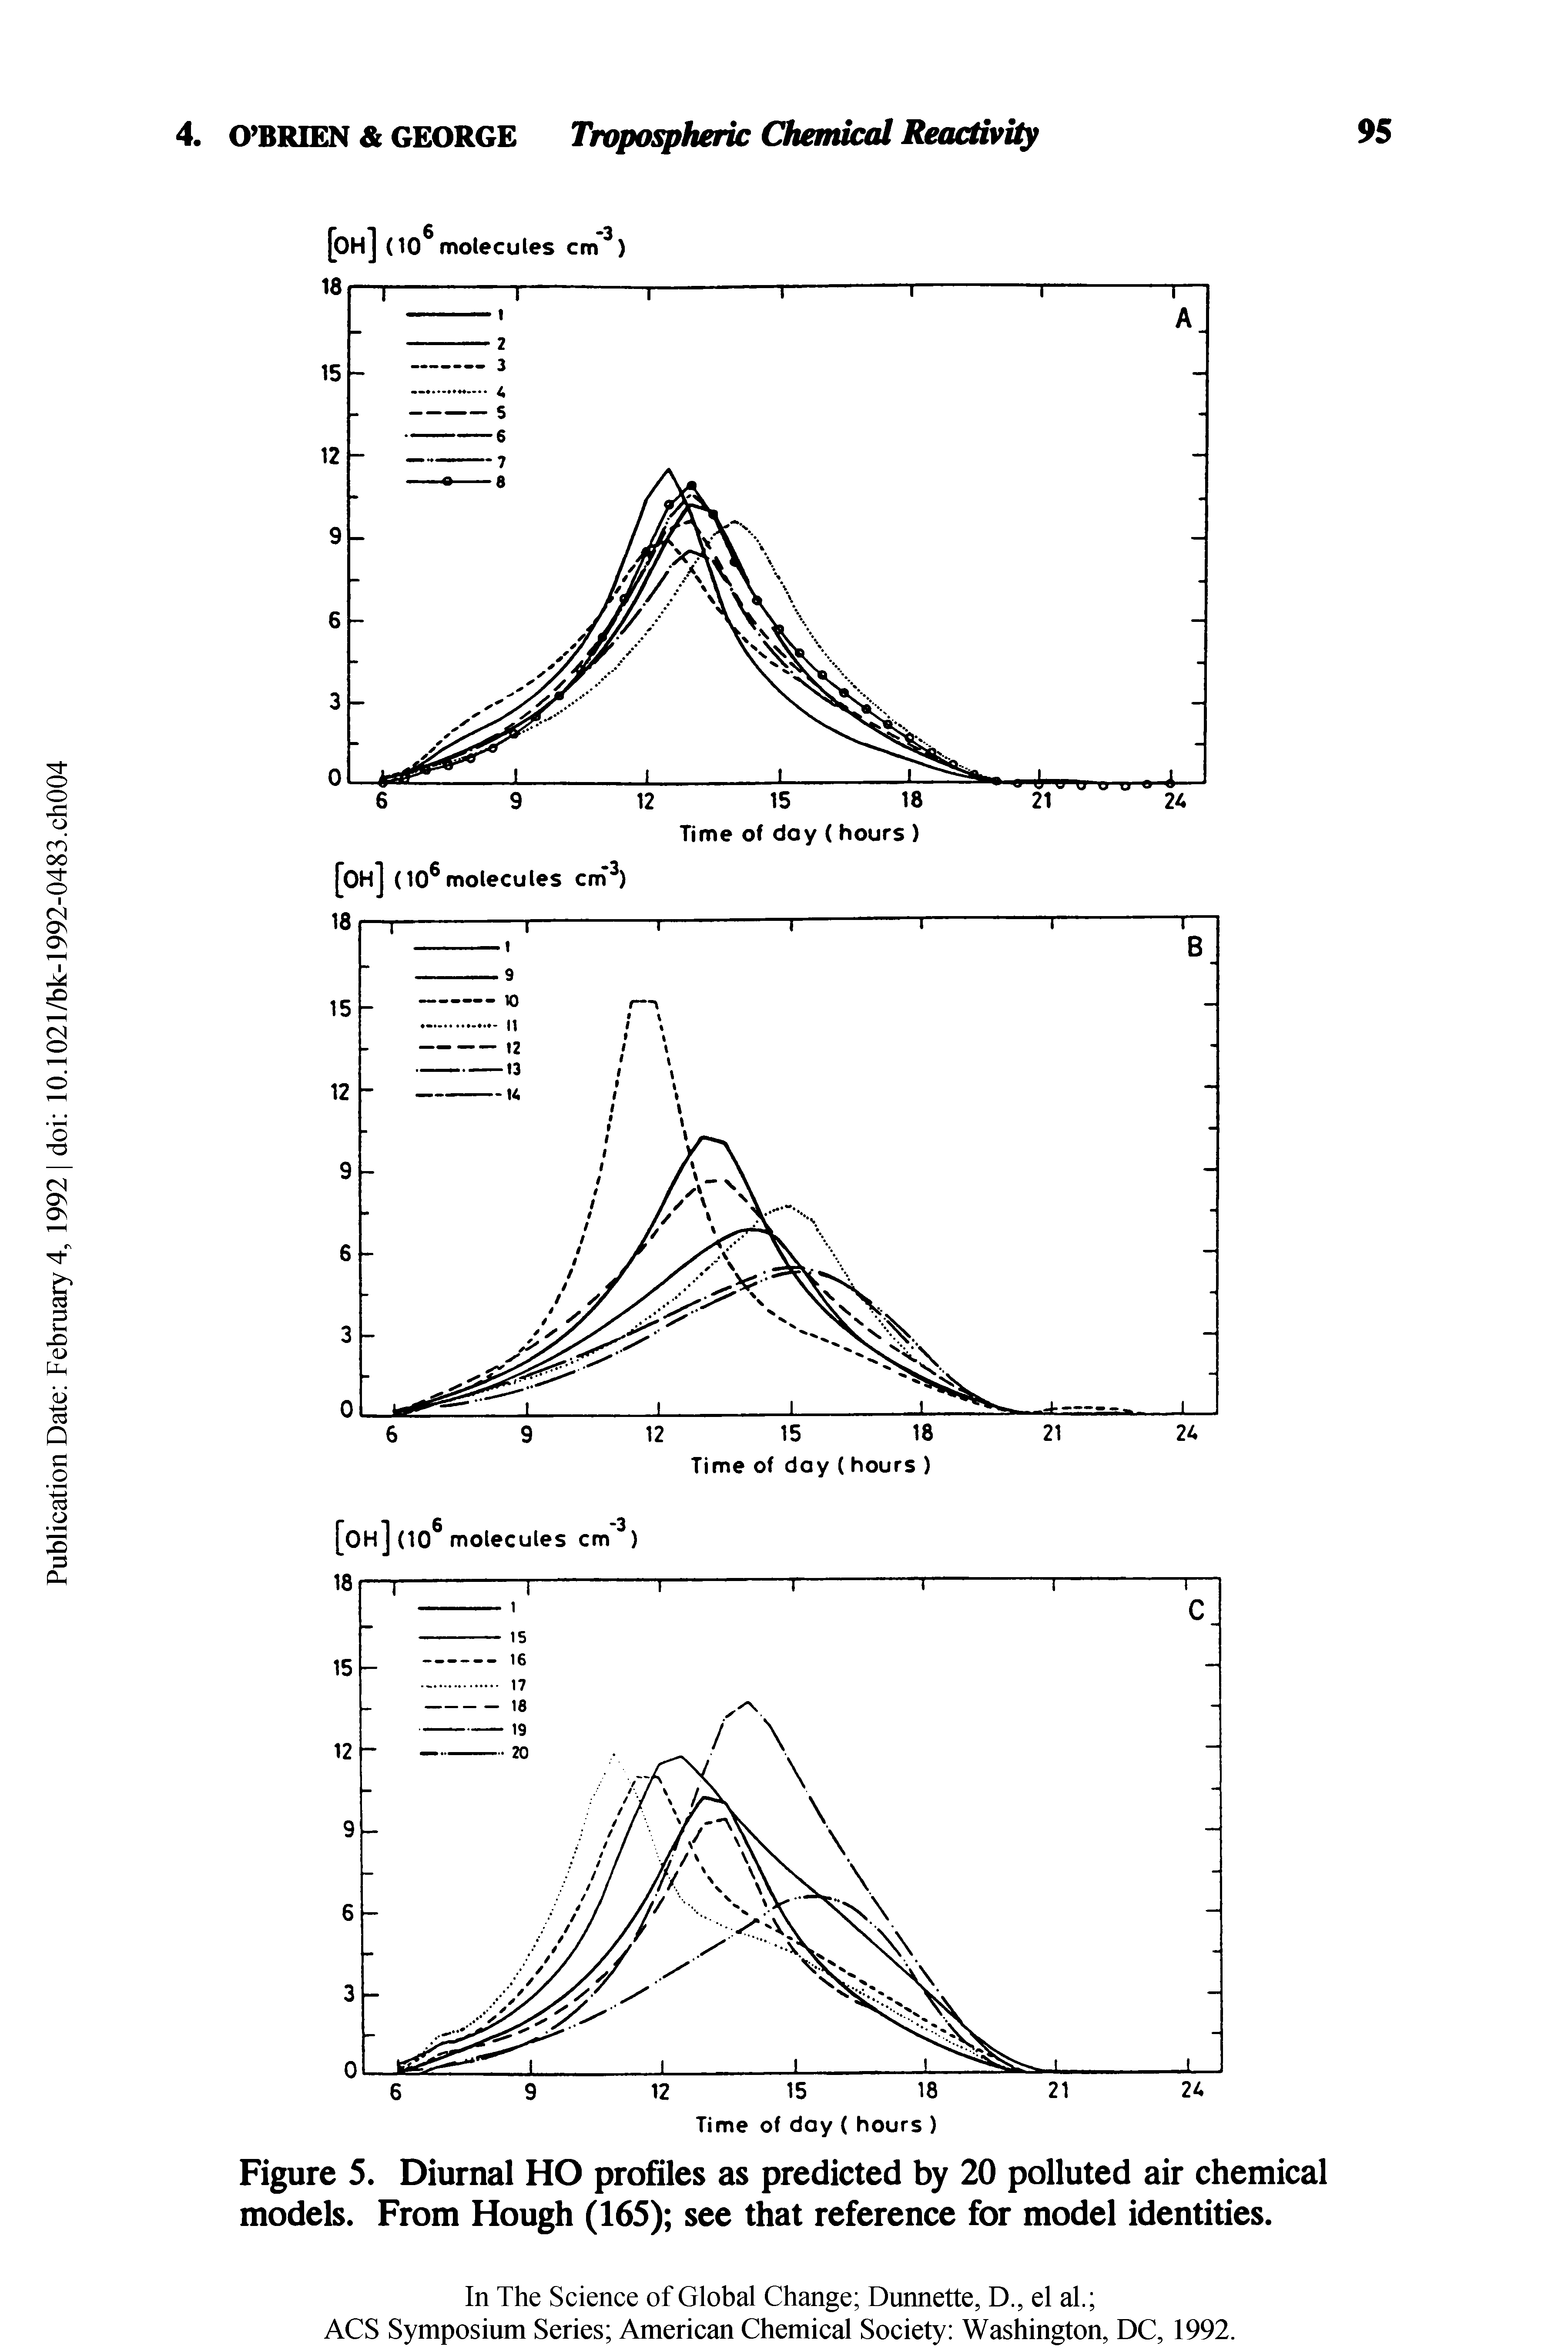 Figure 5. Diurnal HO profiles as predicted by 20 polluted air chemical models. From Hough (165) see that reference for model identities.